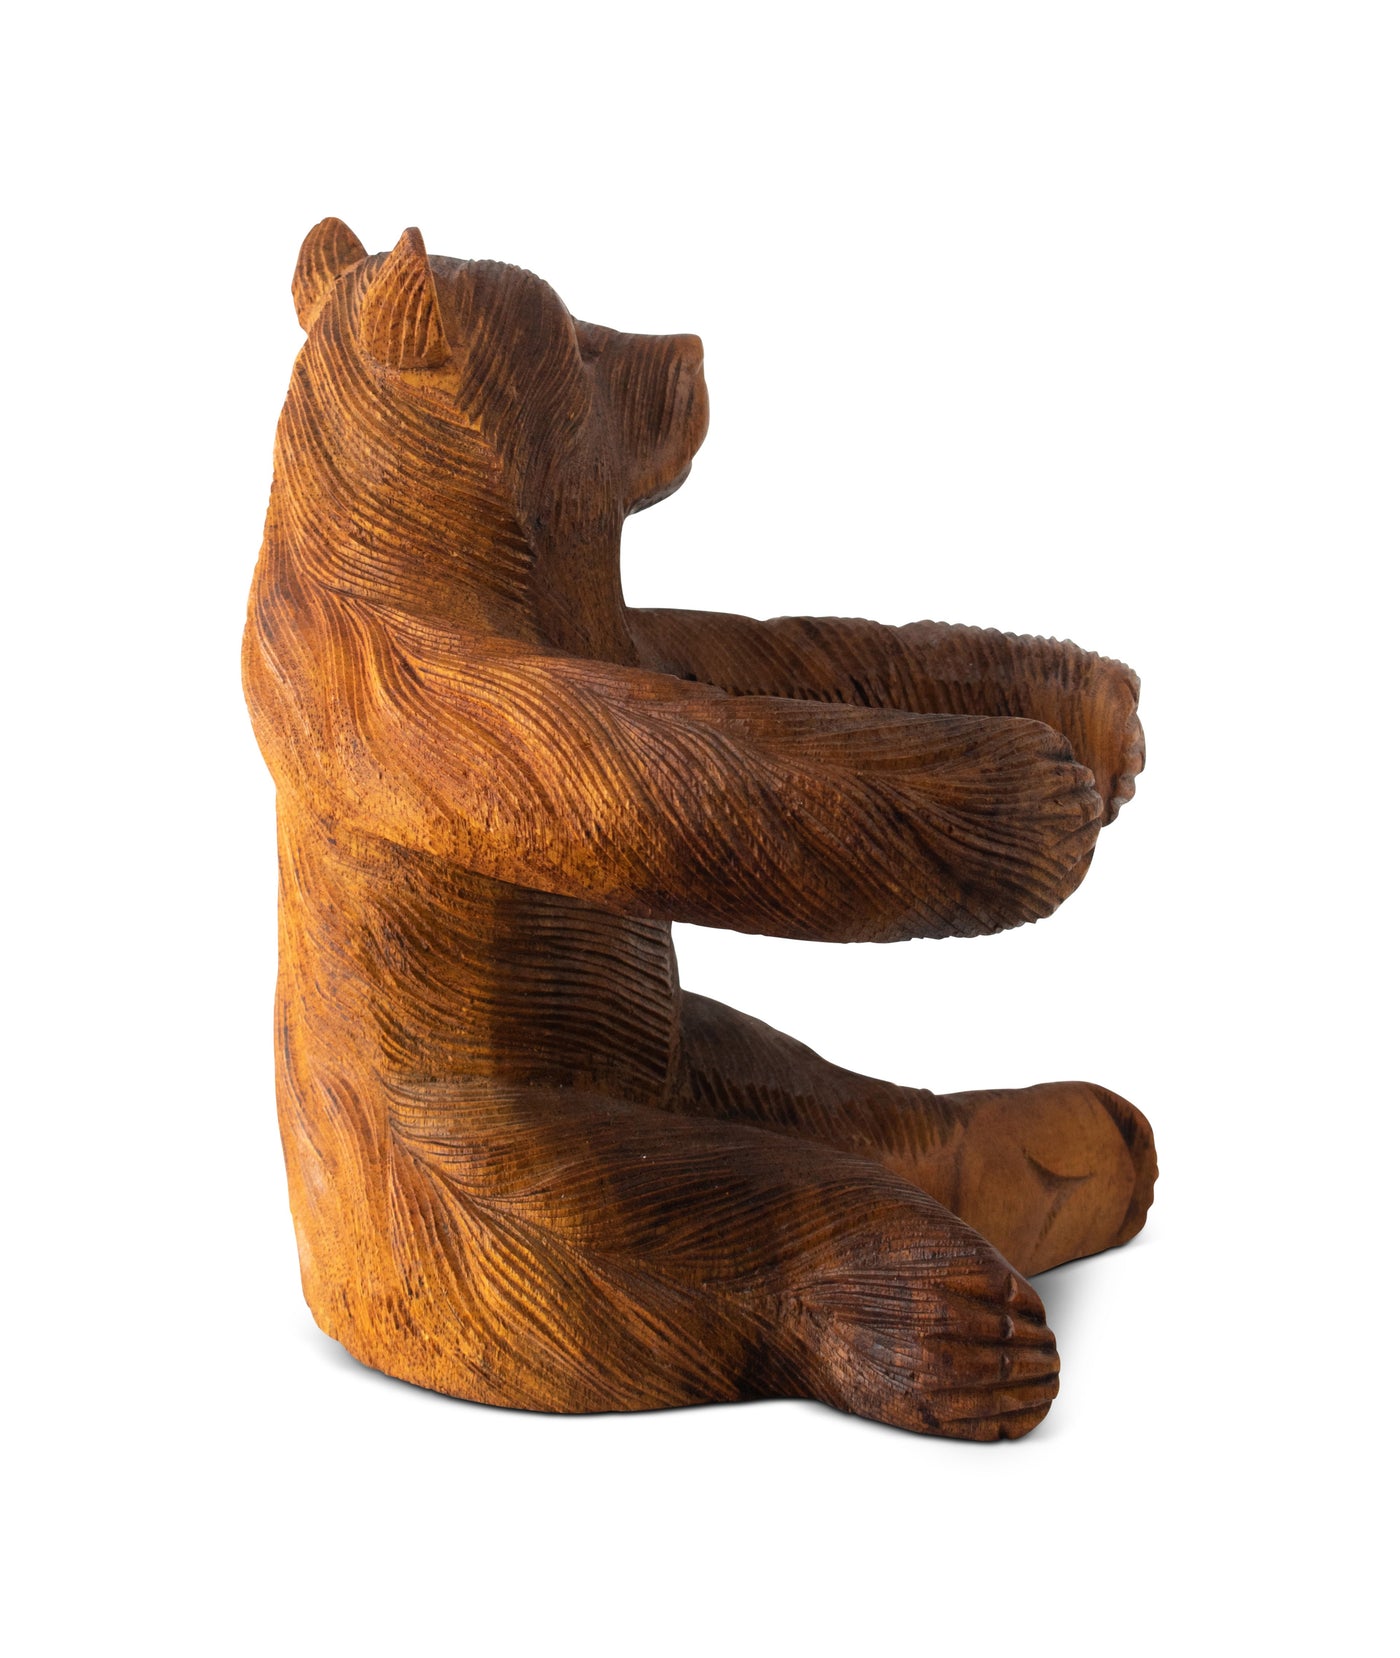 Wooden Hand Carved Grizzly Bear Wine Bottle Holder Rack Handmade Tabletop Wood Home Decor Accent Decoration Gift Bar Art Handcrafted Decorative